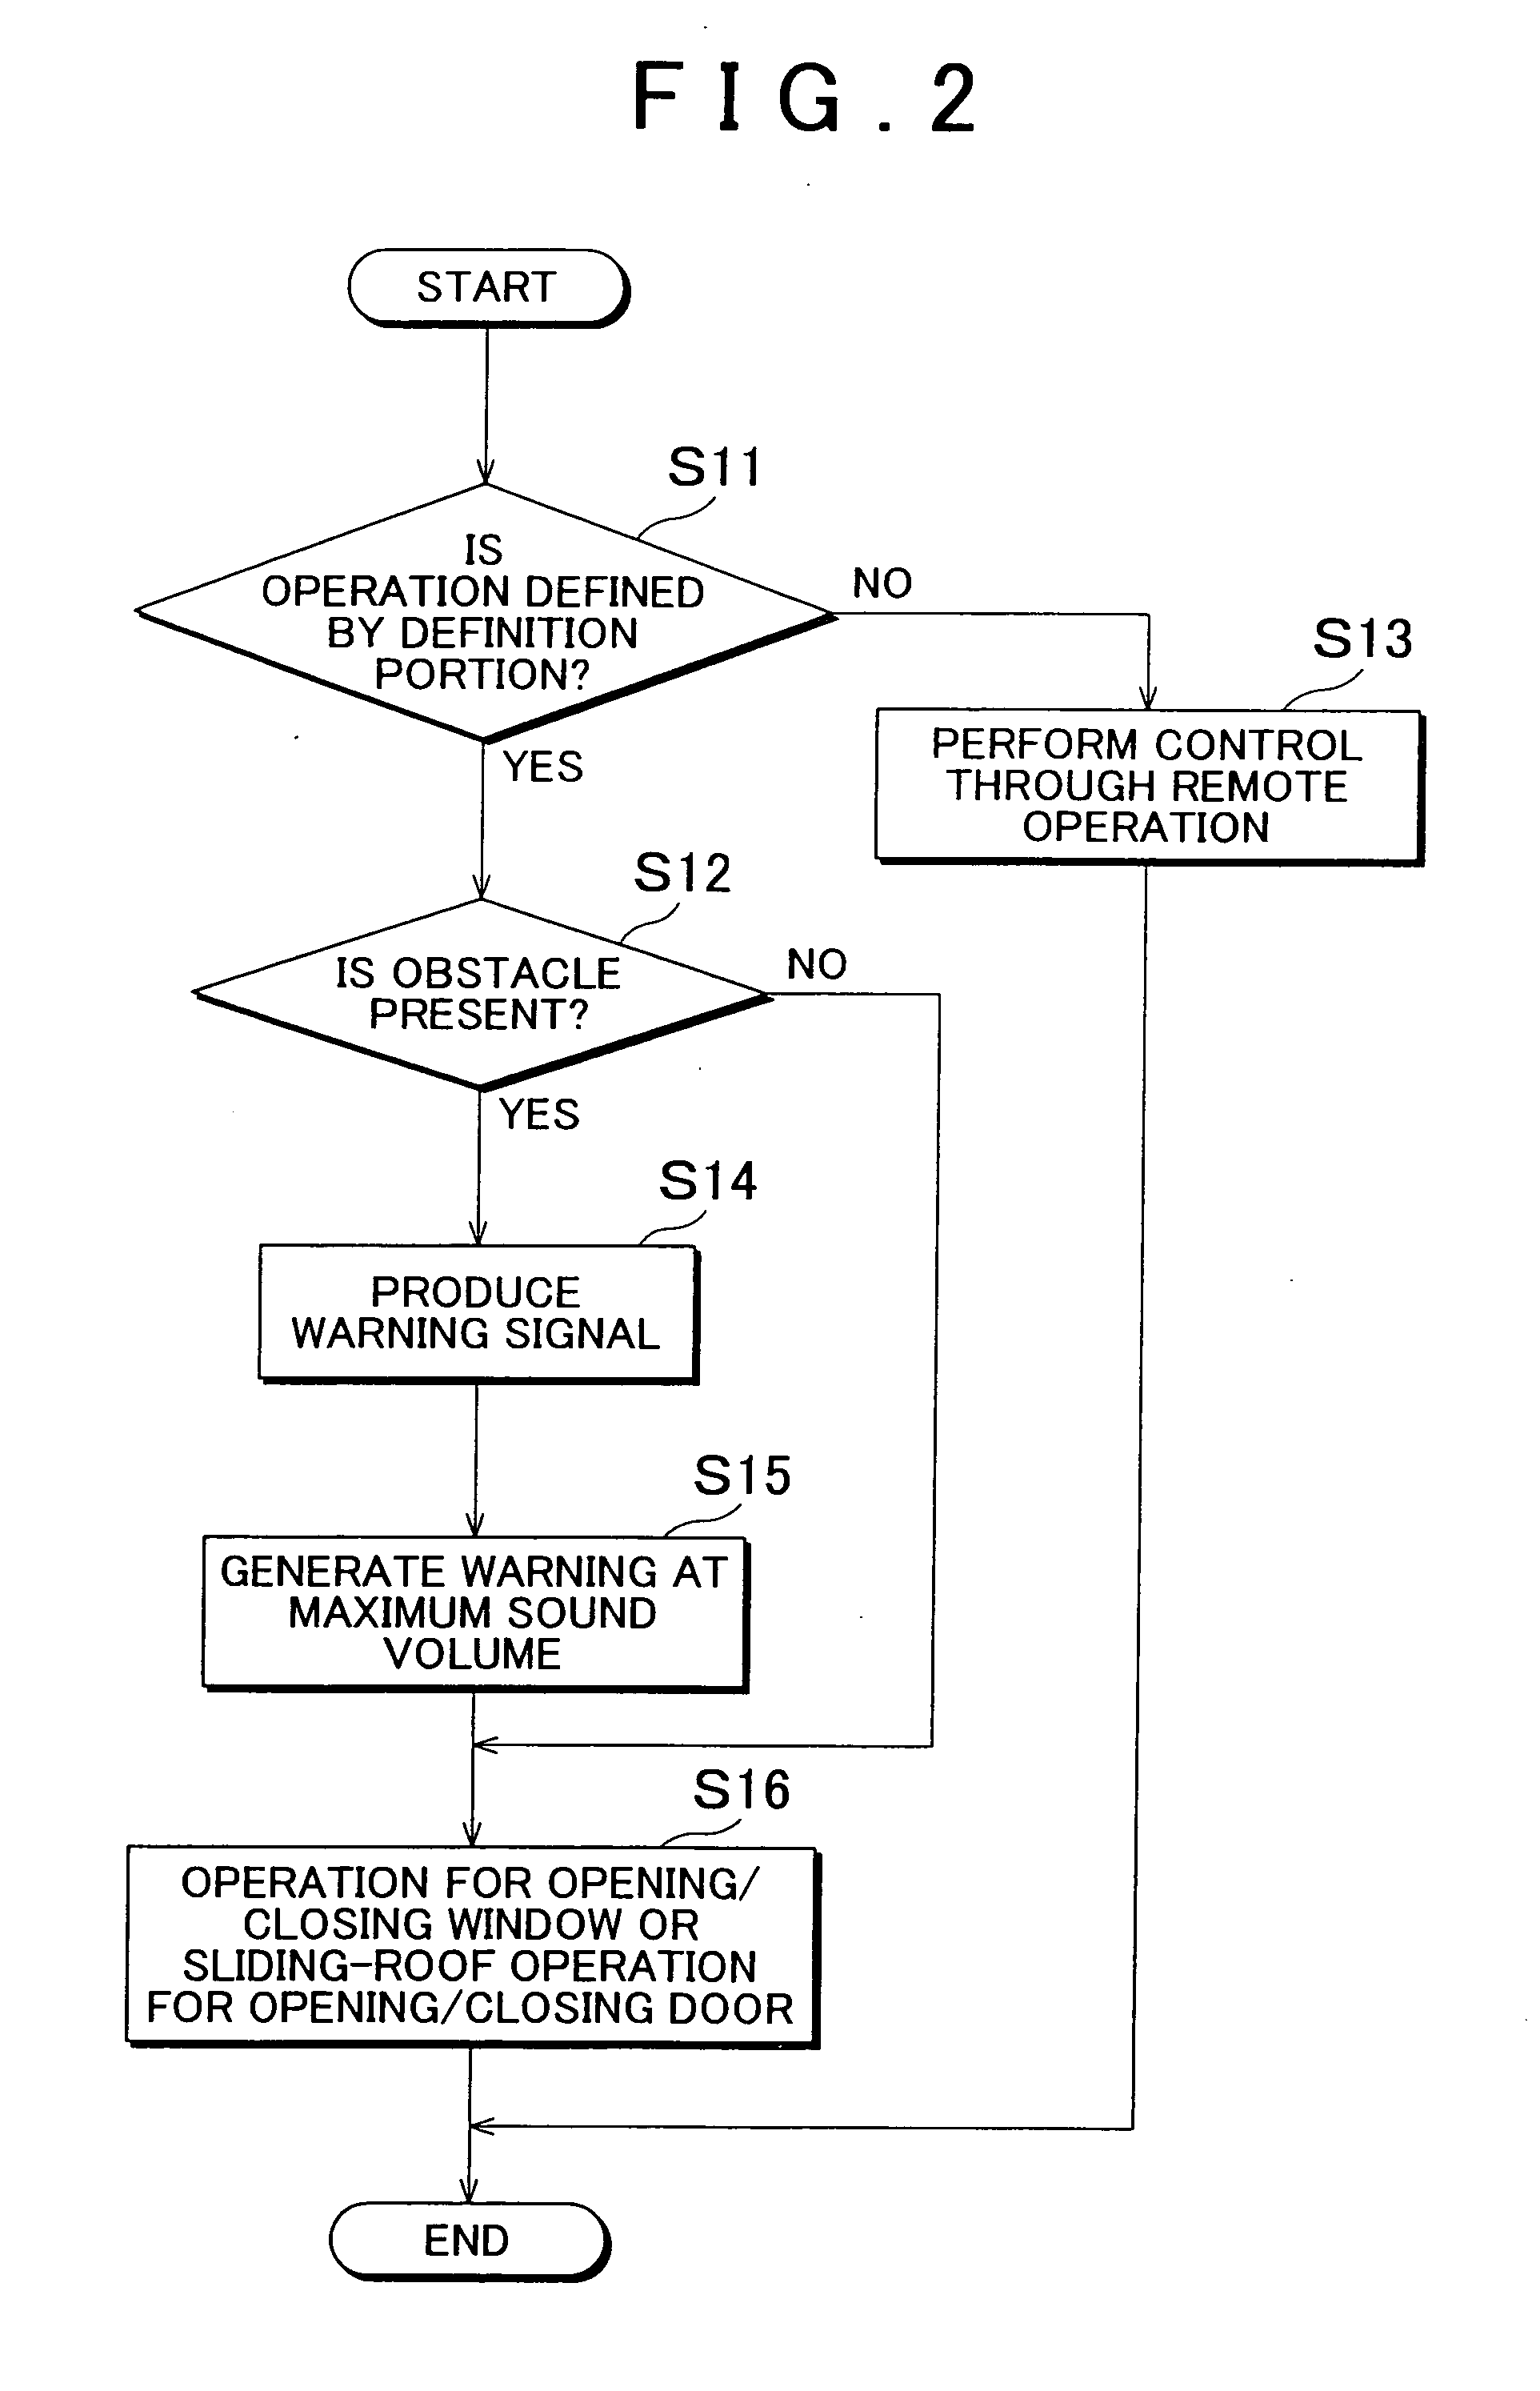 Function operation warning device